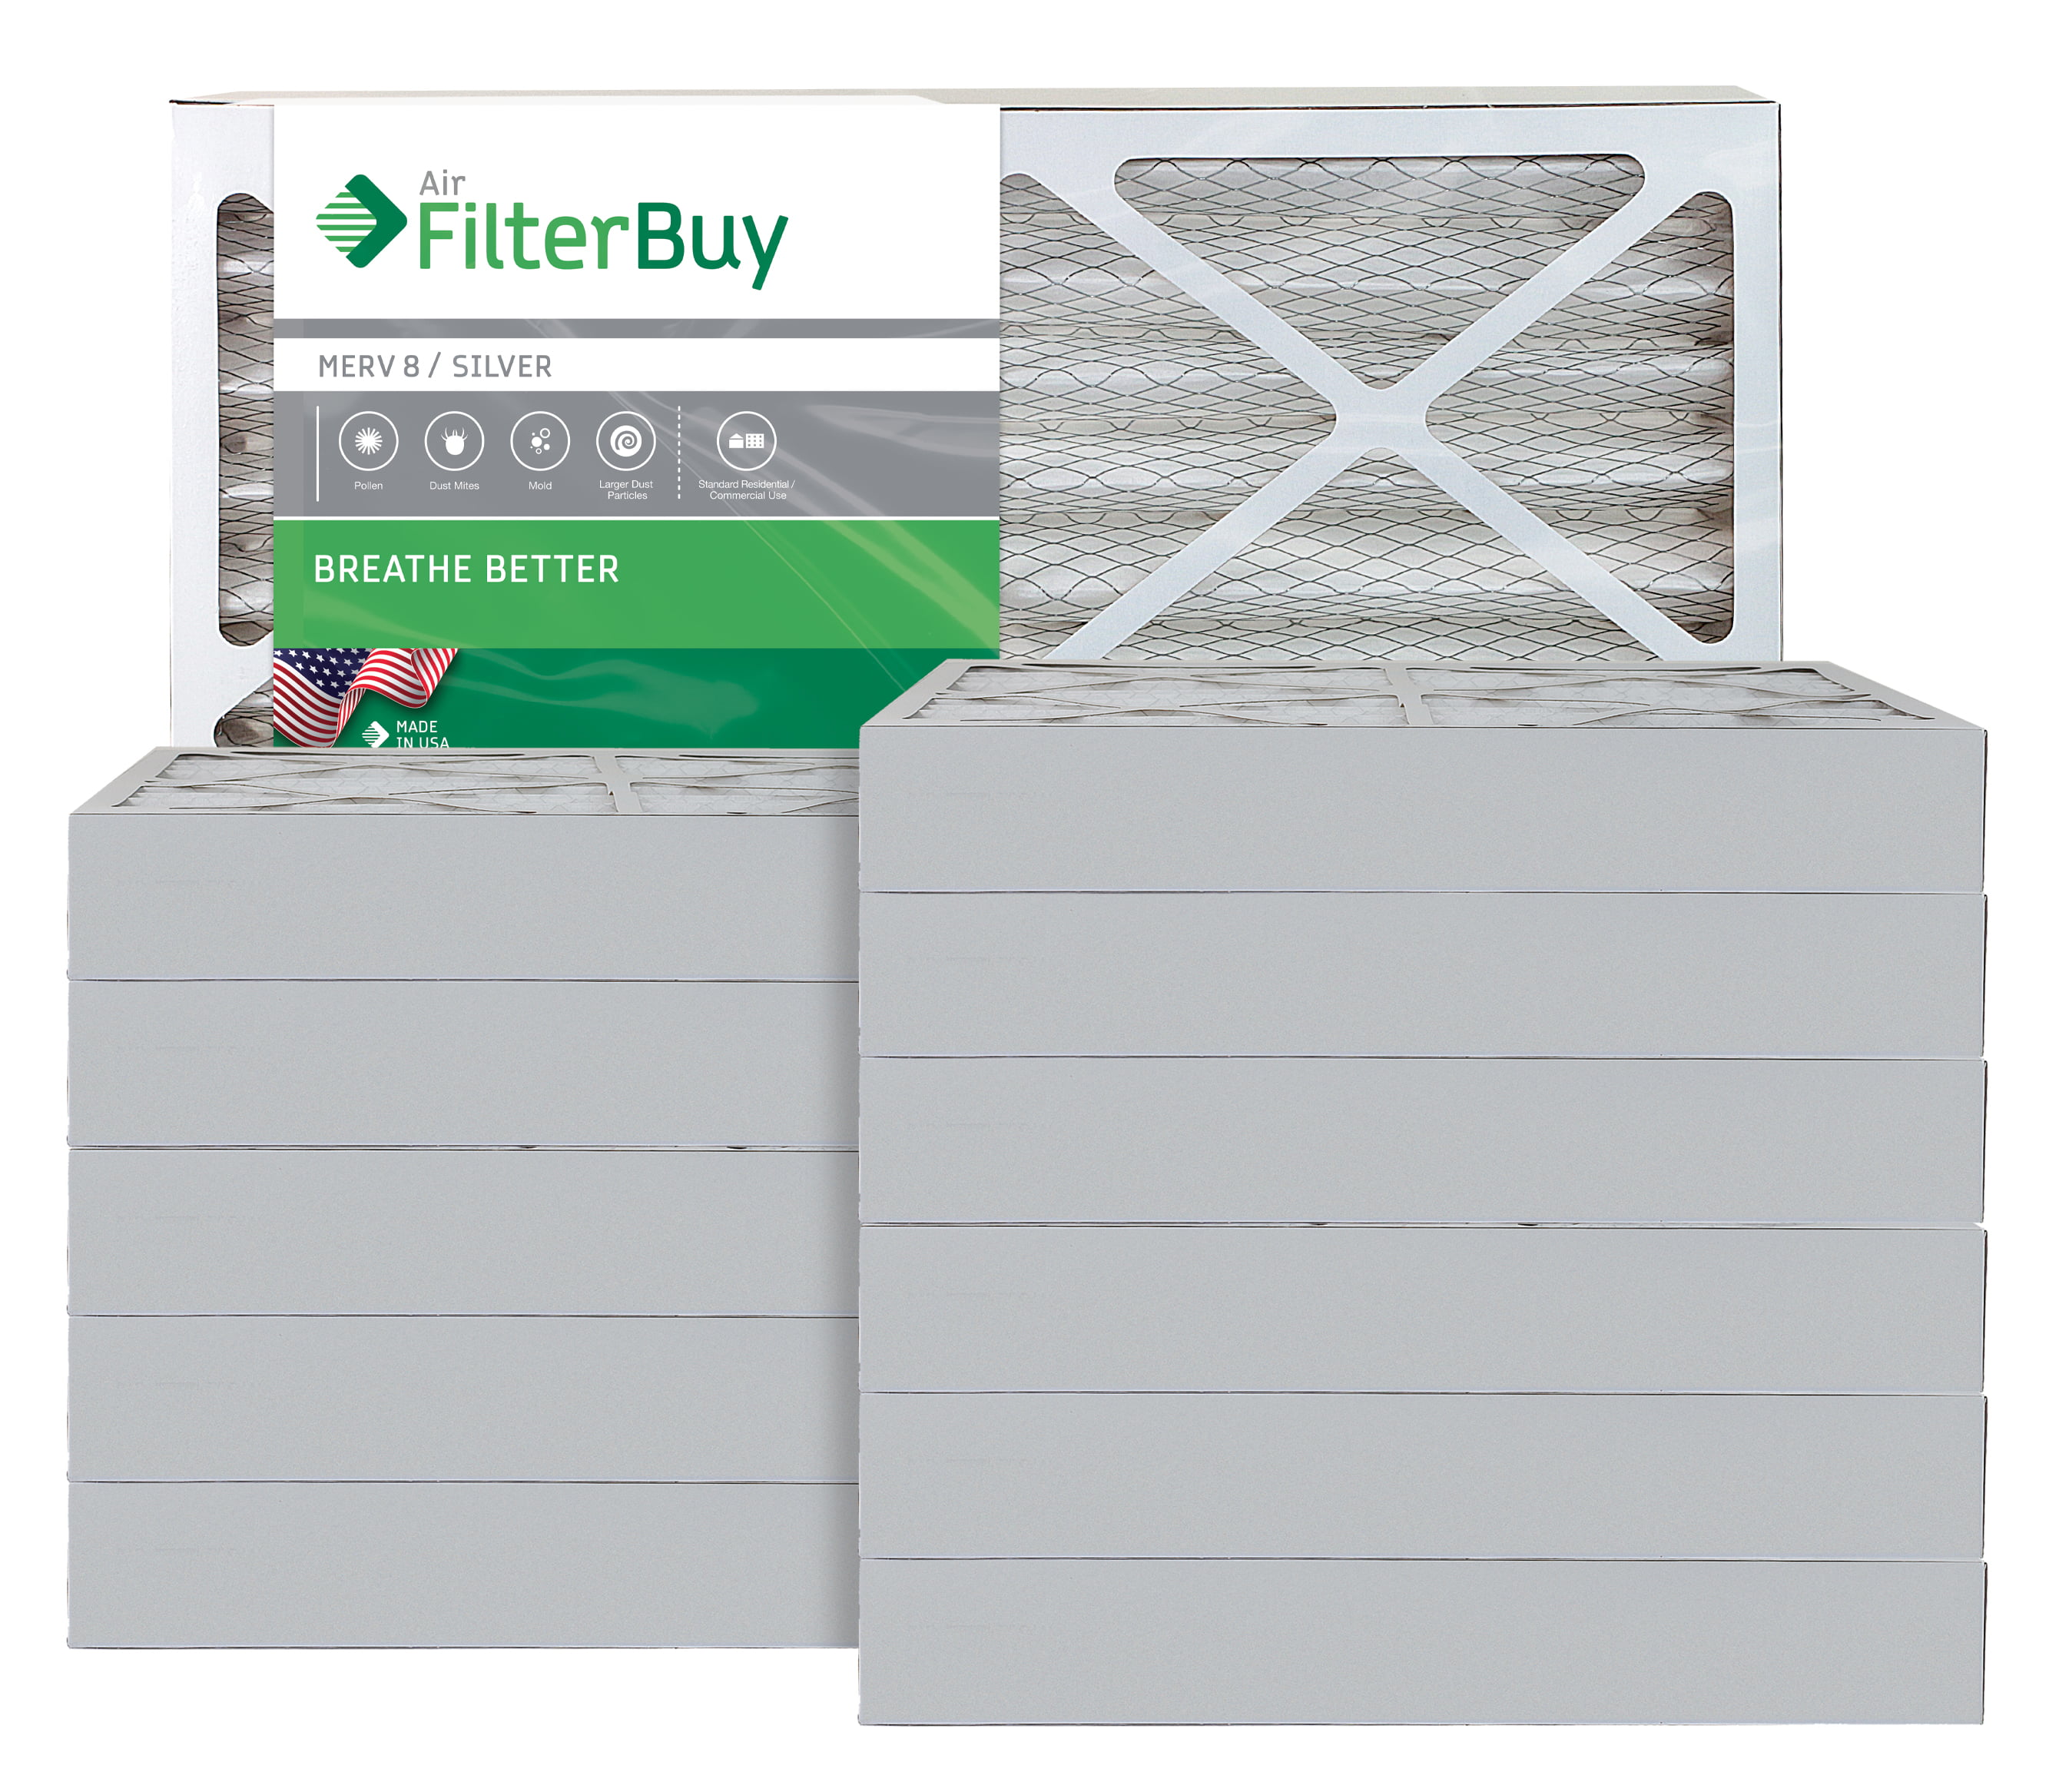 FilterBuy 18x25x4 MERV 8 Pleated AC Furnace Air Filter, Pack of 4 Filters 18x25x4 Silver